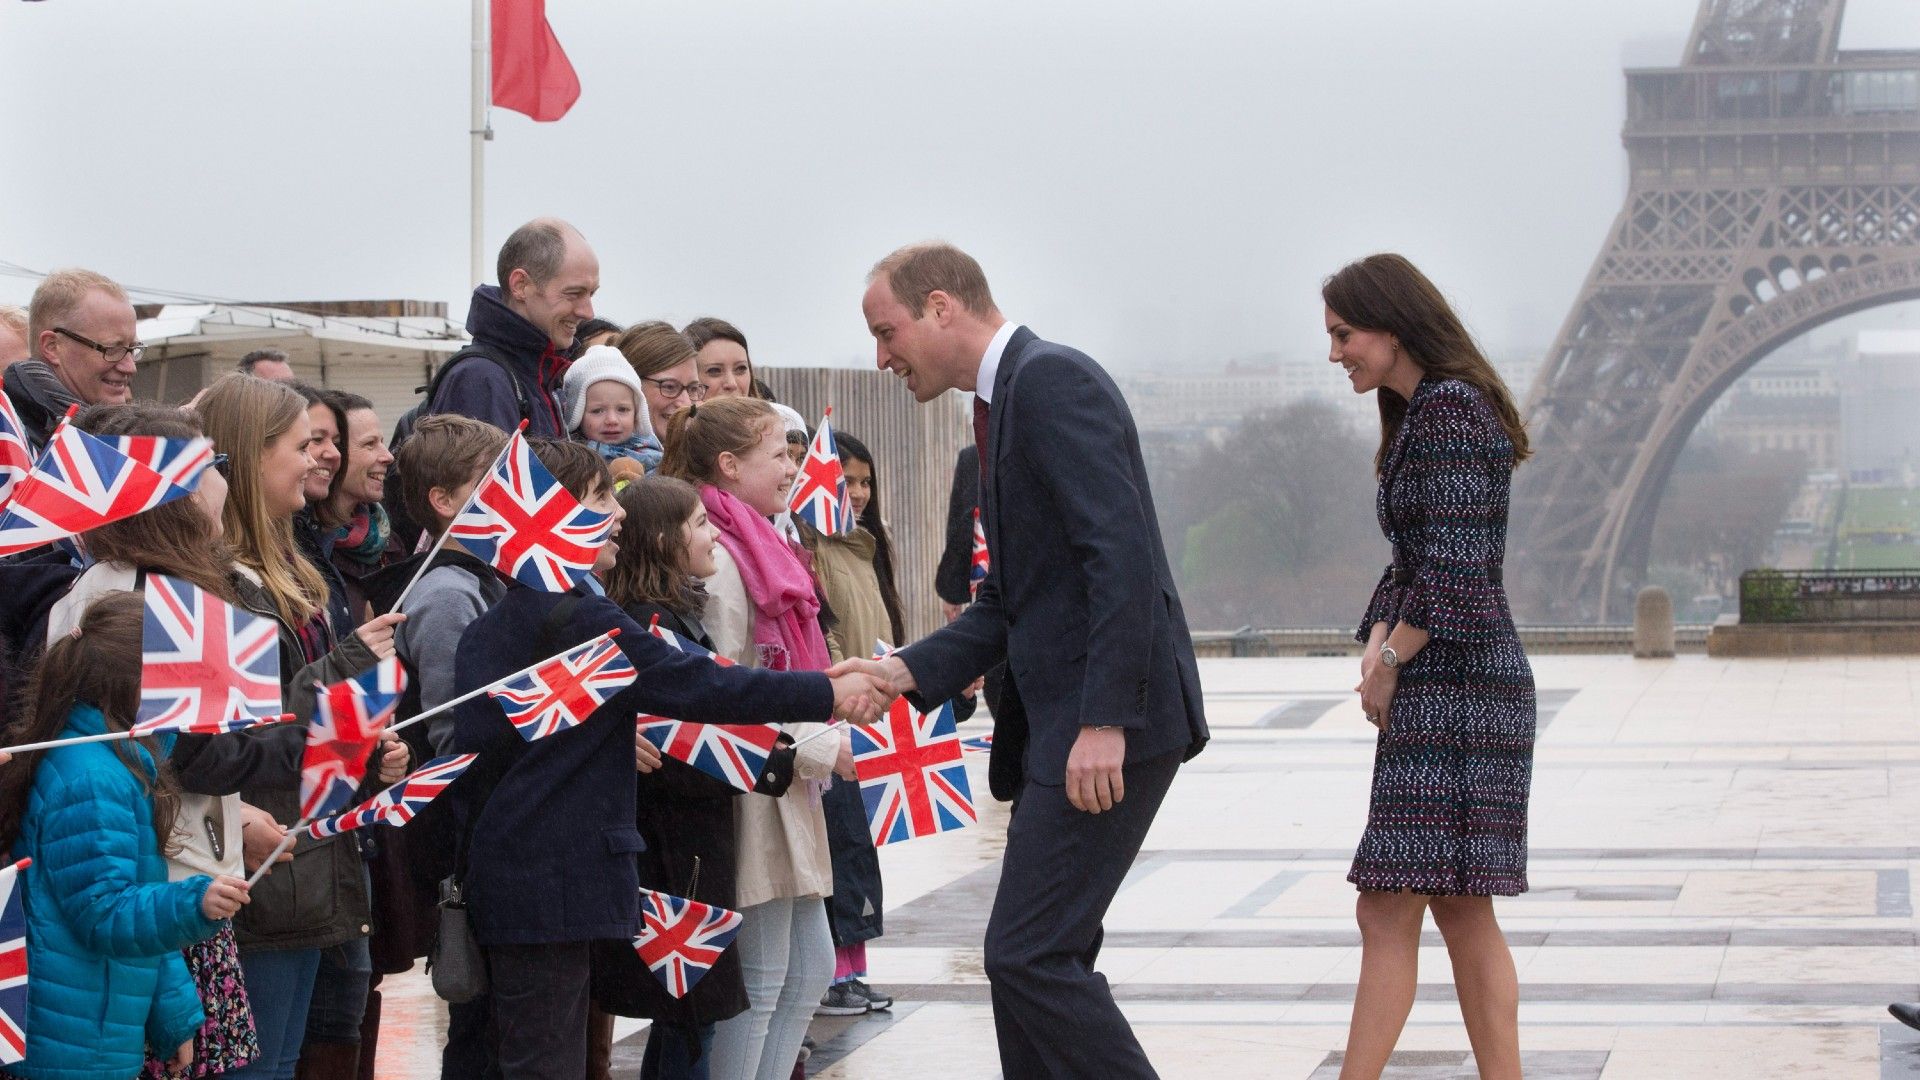 <p>                     In March 2017, the Prince and Princess of Wales delighted hordes of fans waiting to see them at the Trocadero in Paris, France.                   </p>                                      <p>                     The pair were on tour at an event to highlight the ties between the young people of France and the UK, and royal fans came out in force to catch a glimpse of the chic couple.                   </p>                                      <p>                     Dressing on theme, Kate wore a multicolour tweed outfit from the iconic French fashion house, Chanel.                   </p>